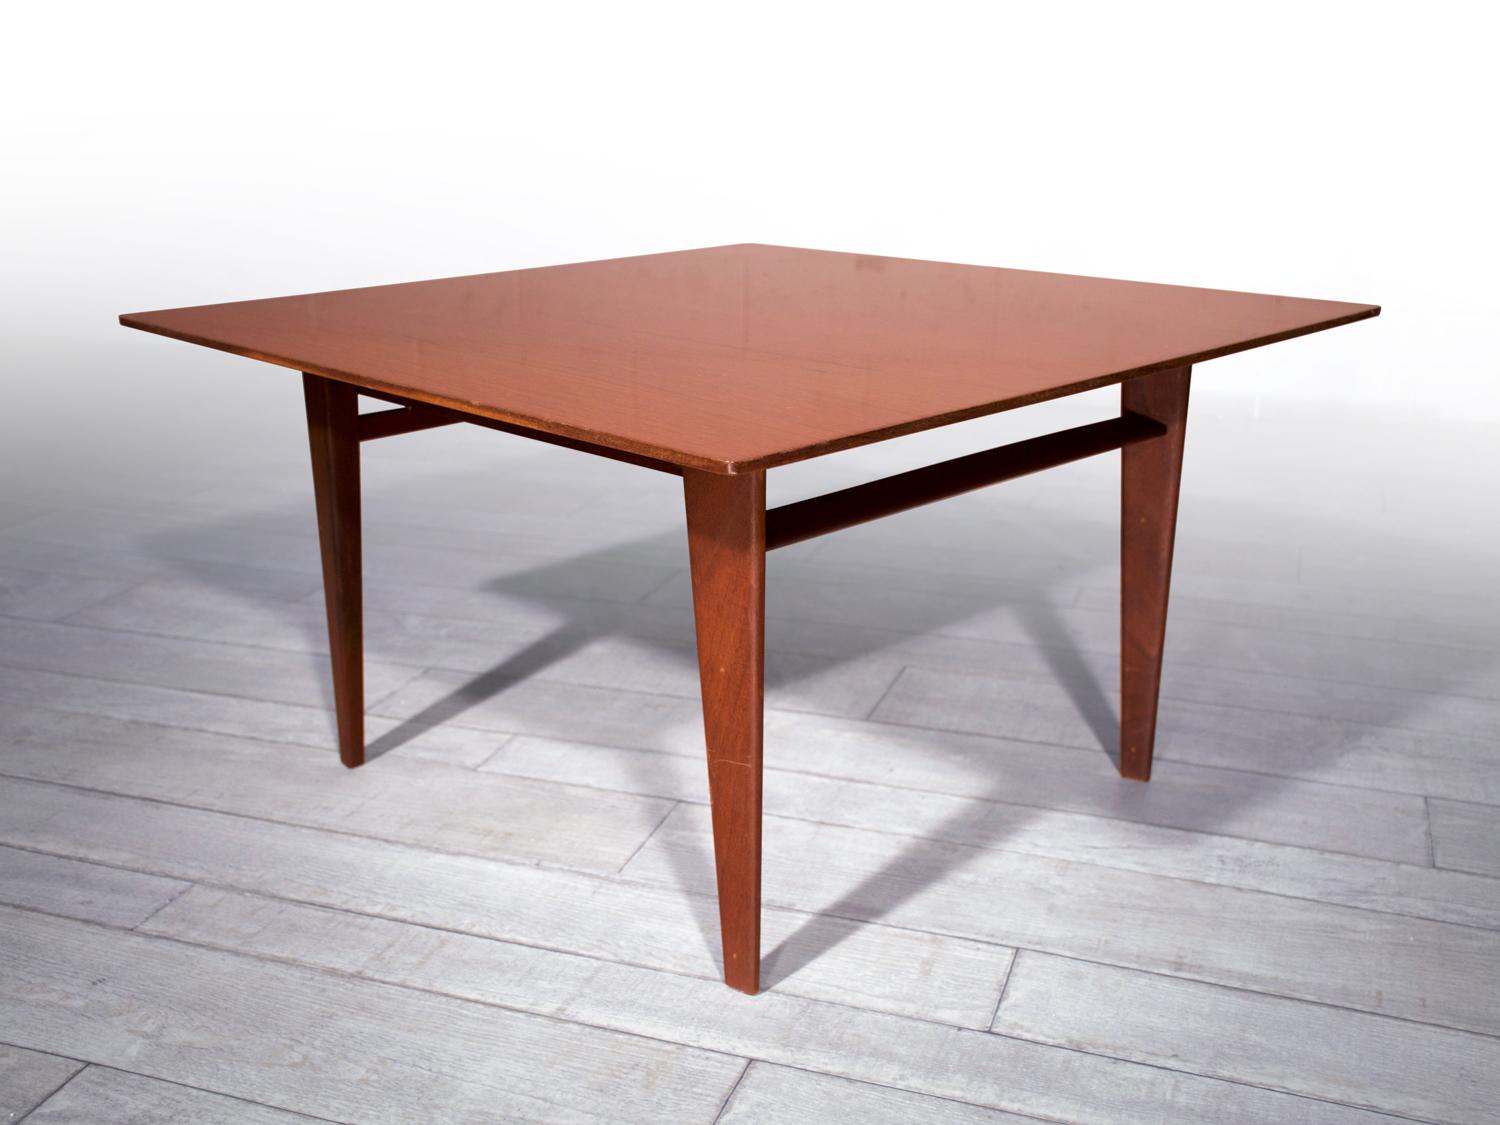 Stylish coffee table in veneered teak wood, very well designed and produced by Vittorio Dassi for Dassi Mobili Moderni in the 1950s-1960s.
It's in very good conditions of the period, with minor signs of wear consistent with age and gentle use.
All